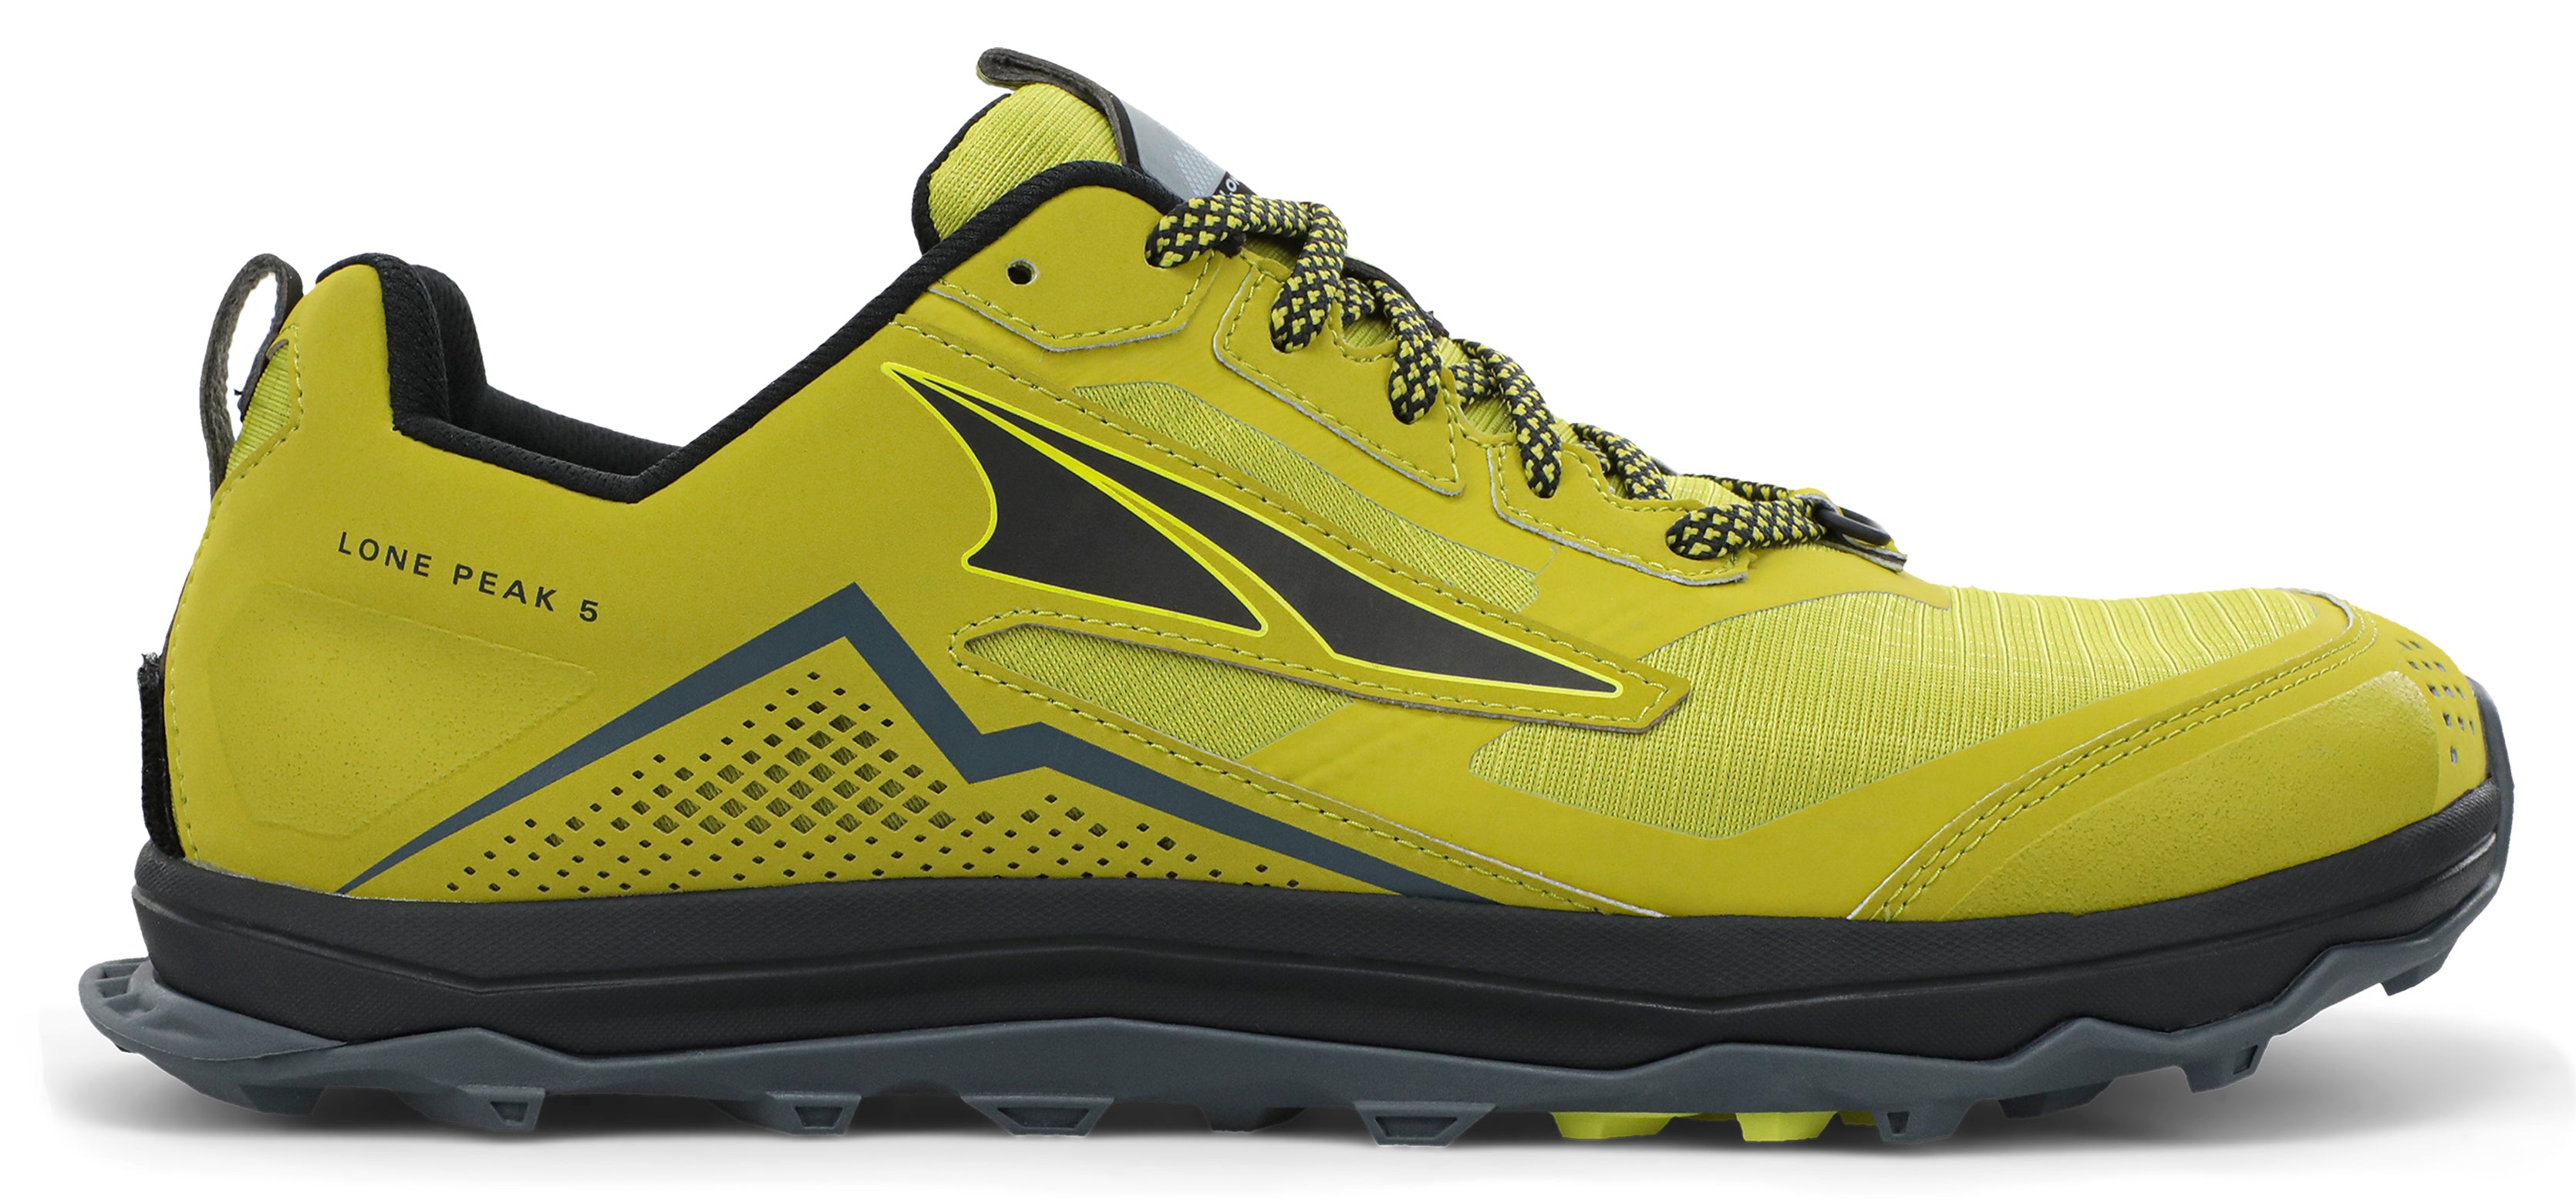 Altra Men's Lone Peak 5 Trail Running Shoe in Lime/Black from the side